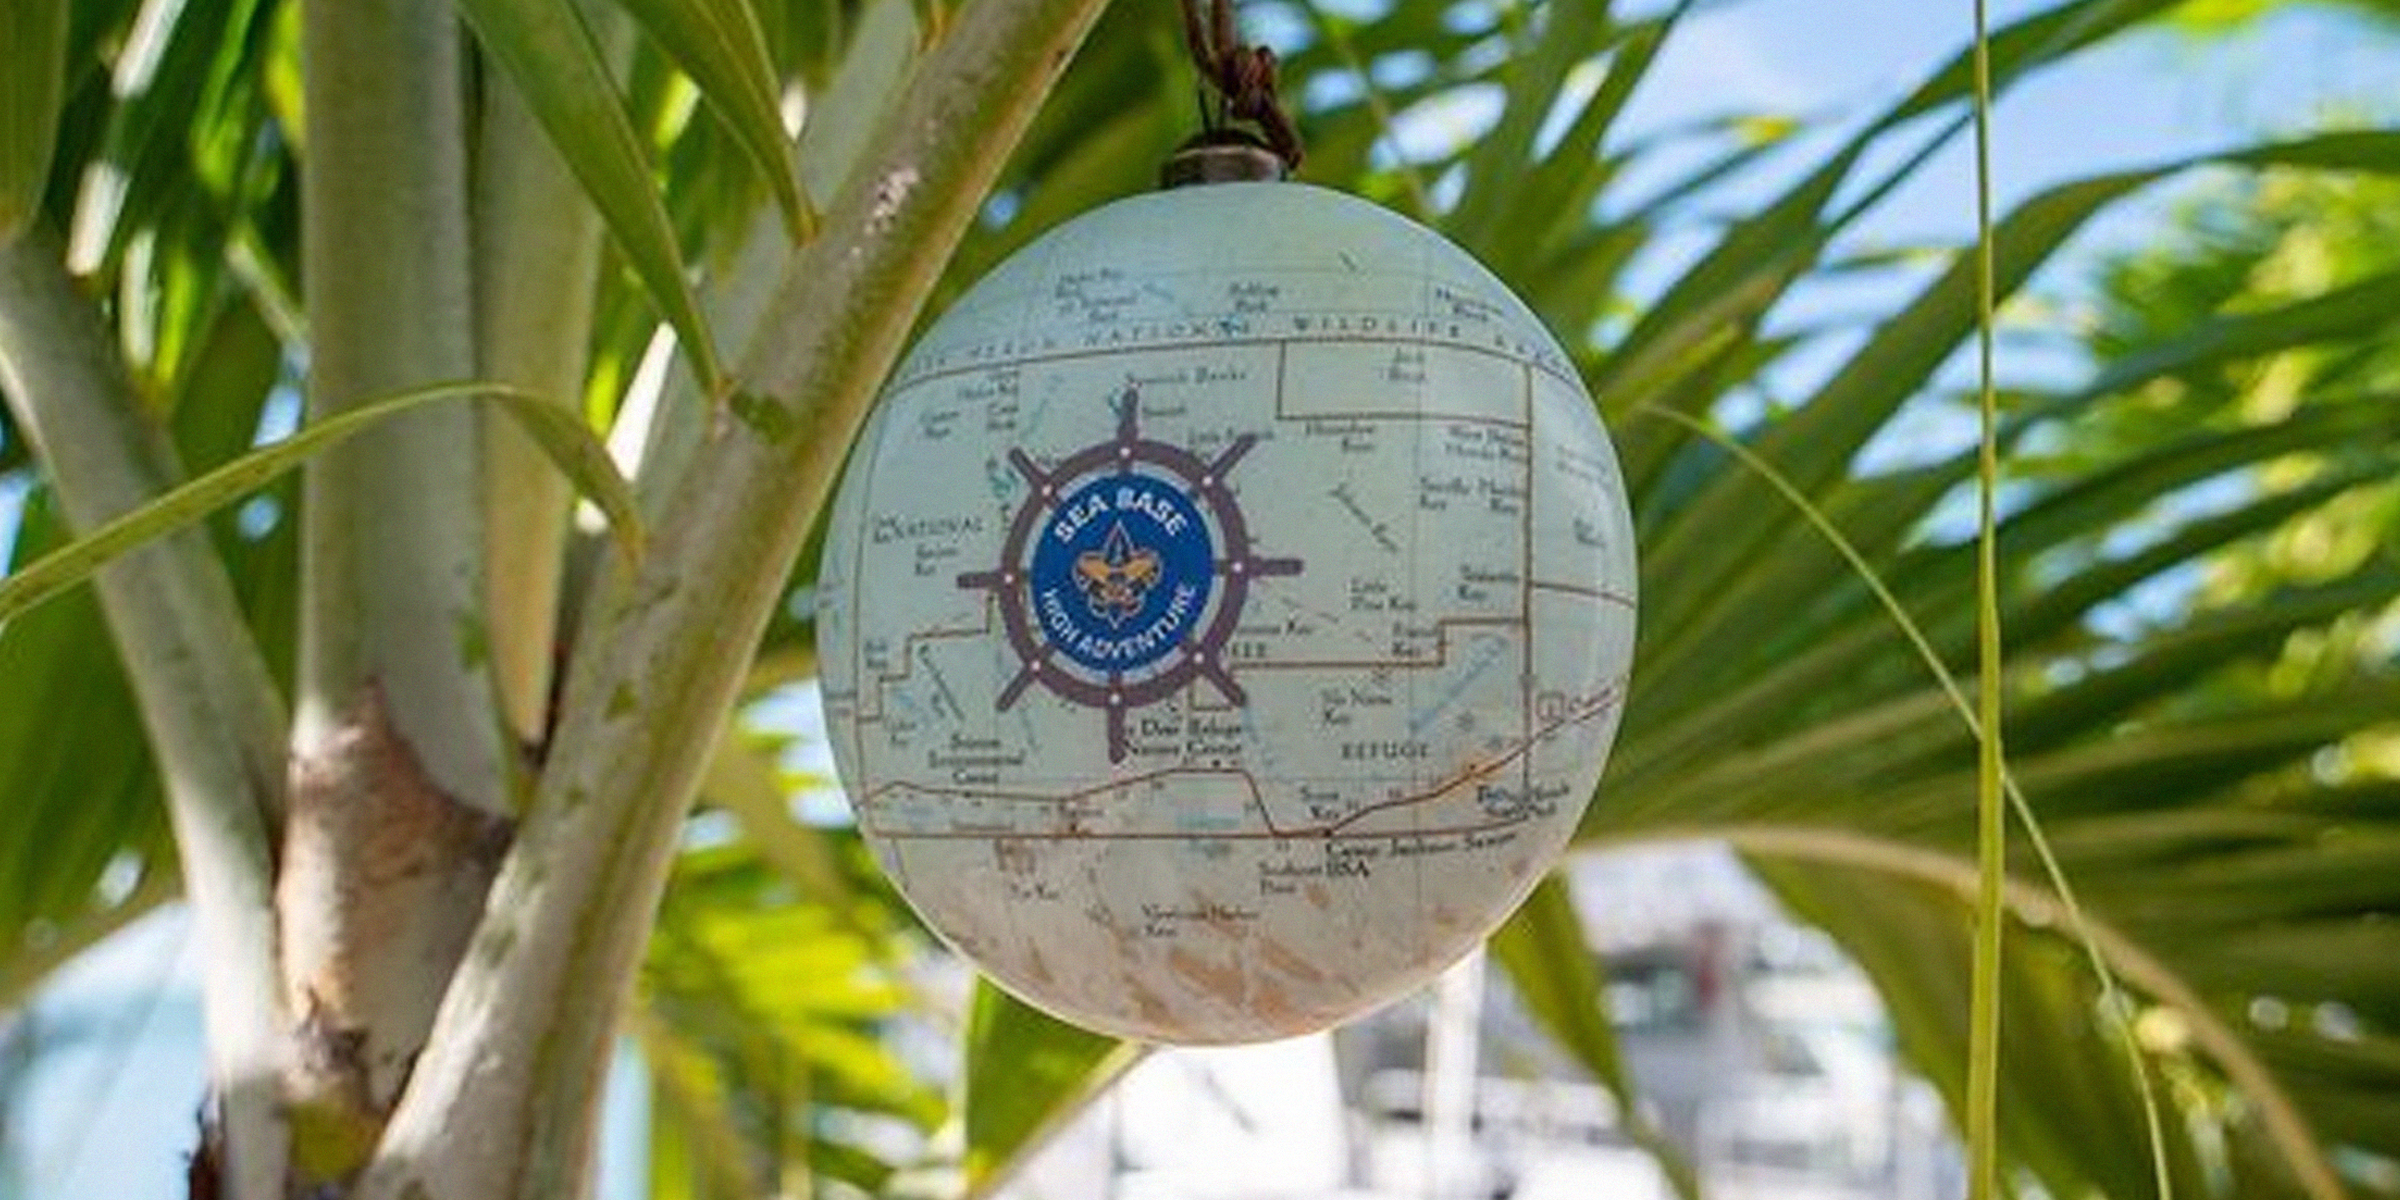 A Sea Base holiday ornament | Source: Instagram/bsaseabase